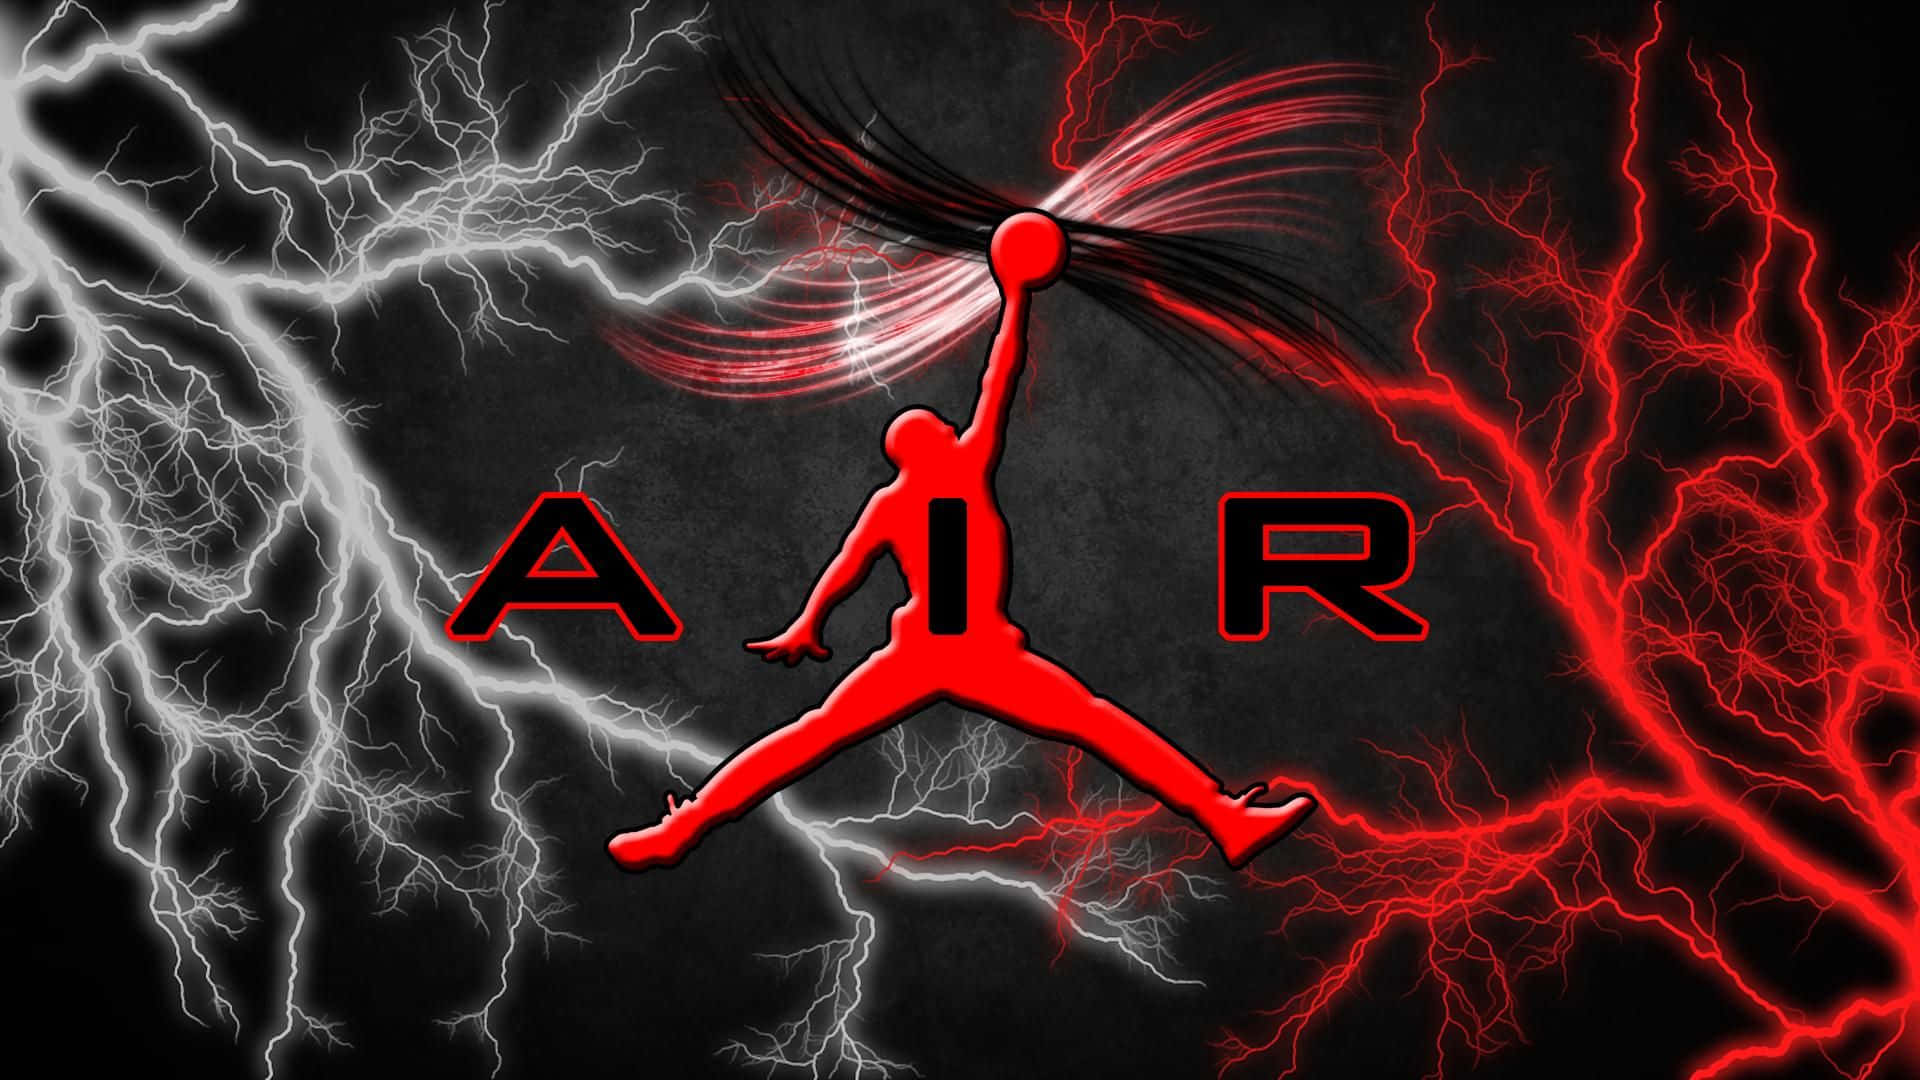 Step up your game with Dope Jordan Wallpaper